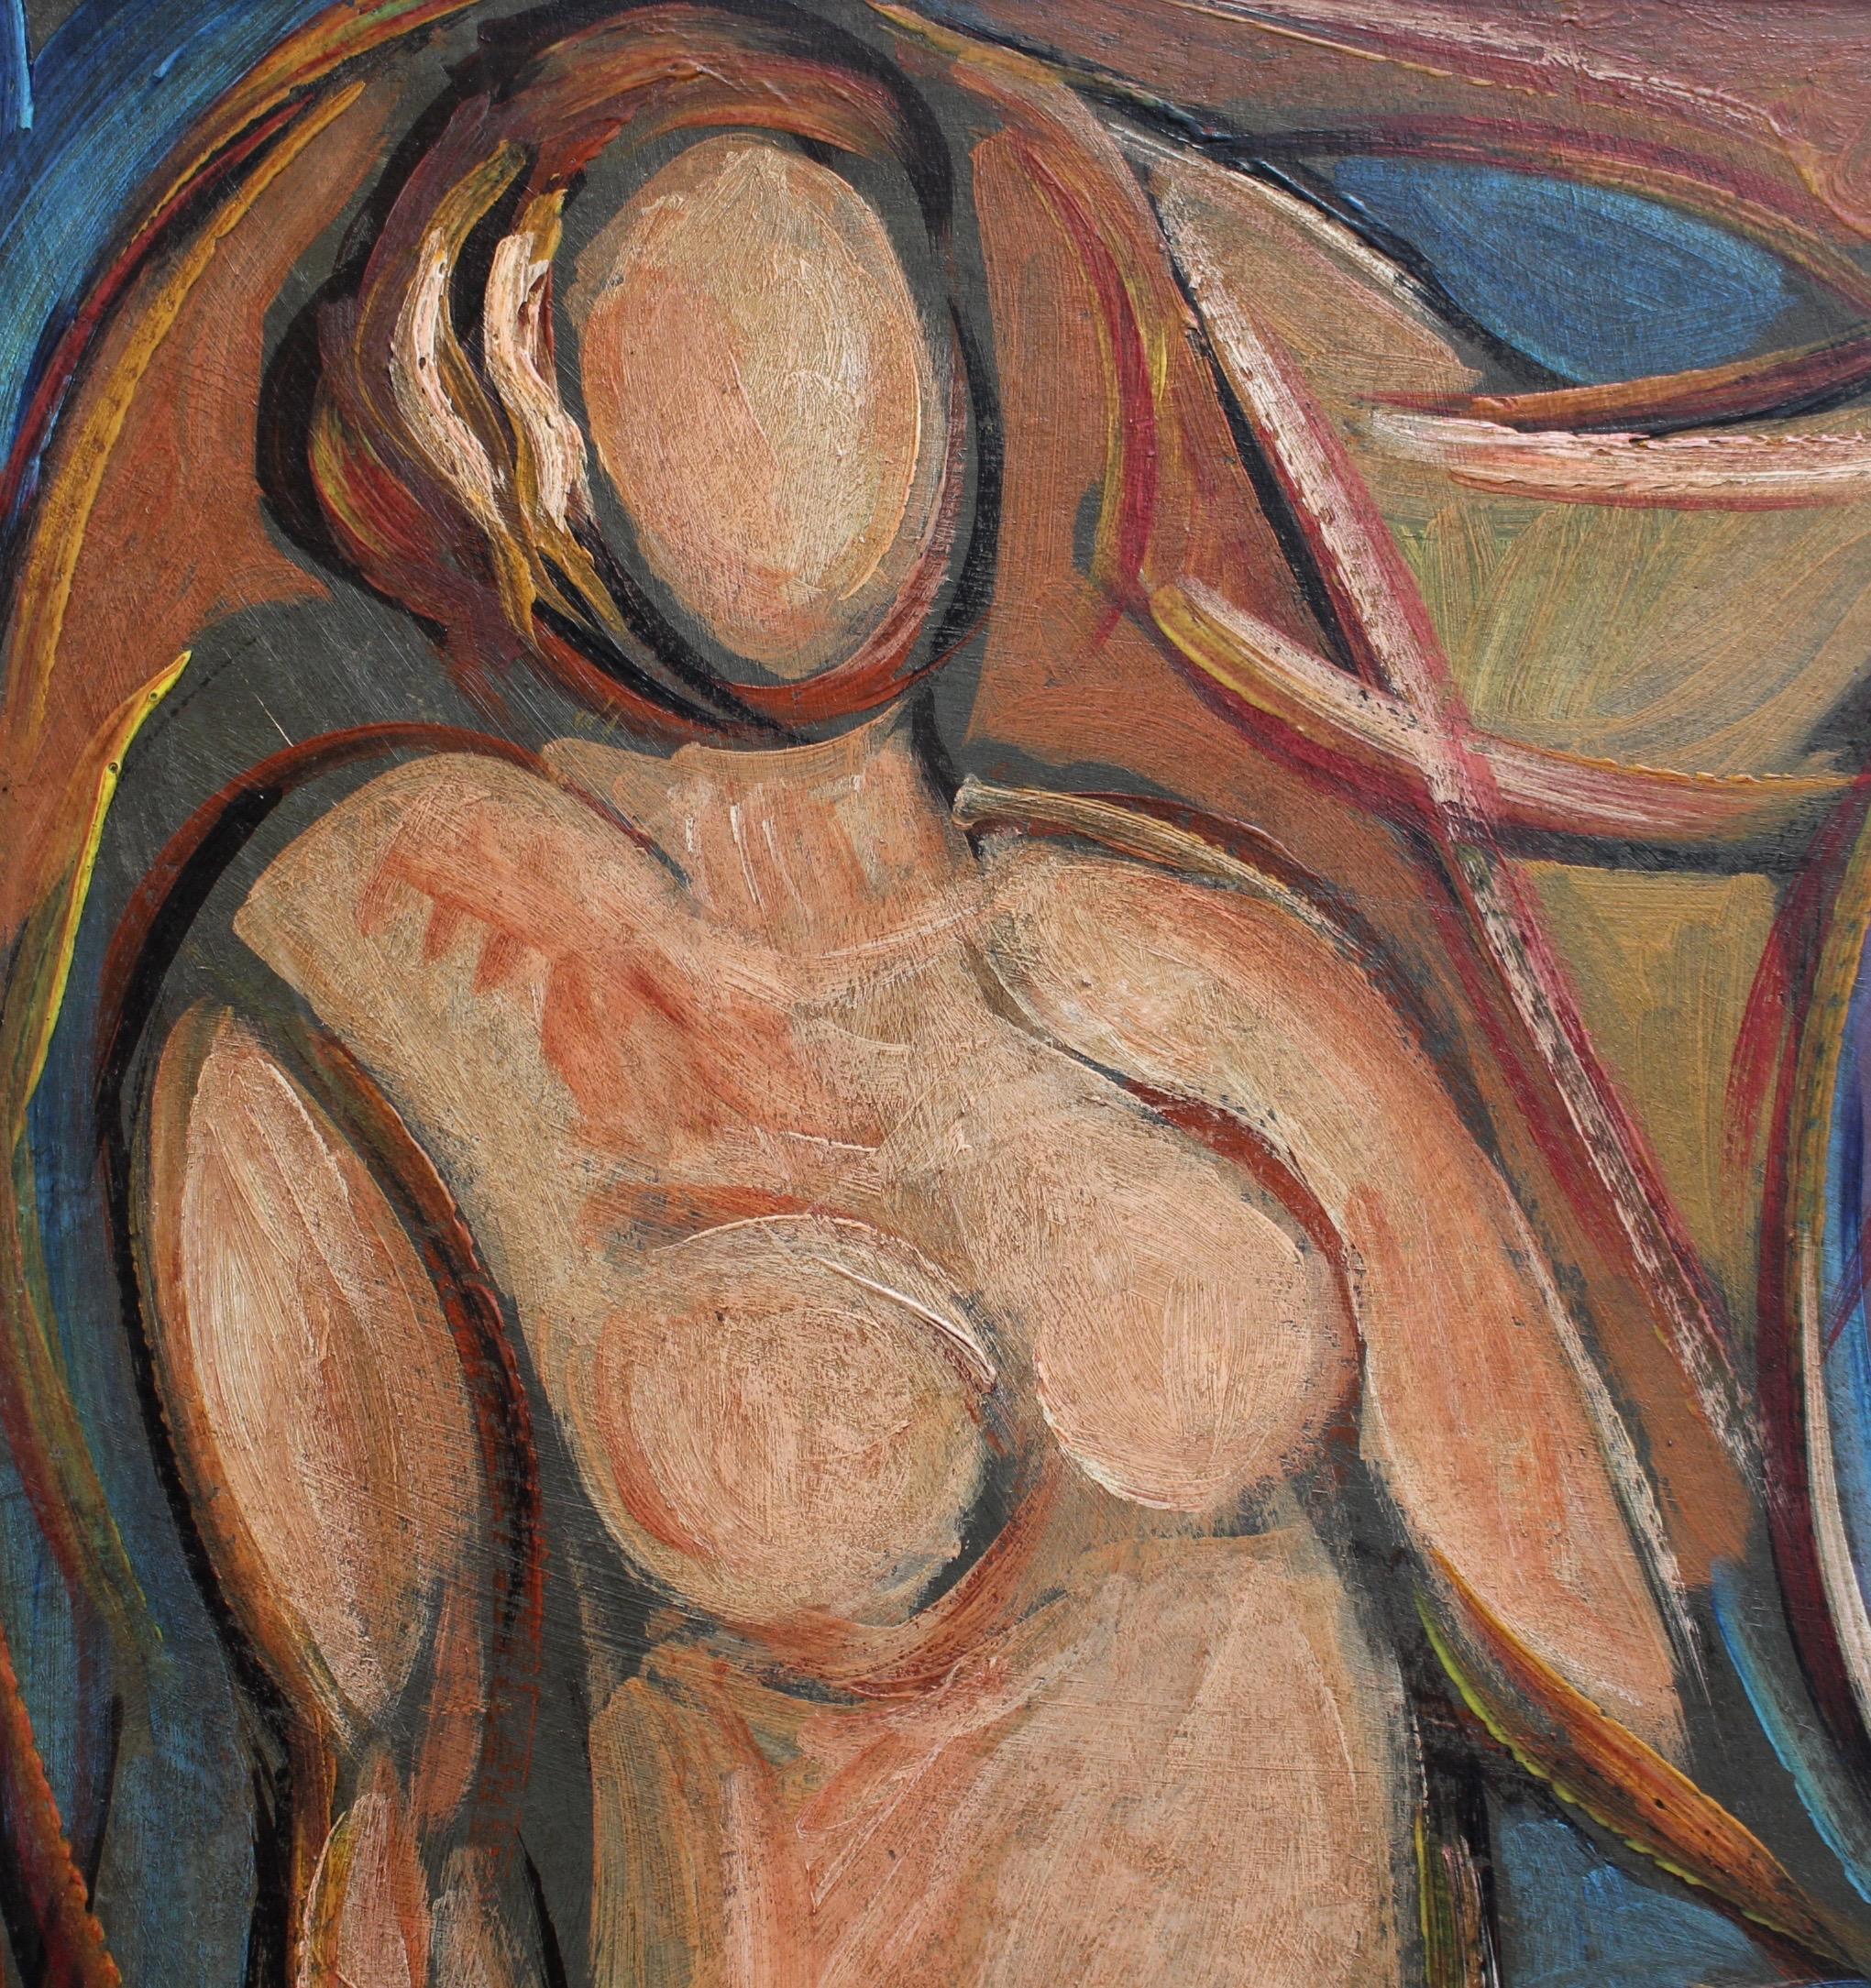 'Nudes in Repose' by STM, Mid-Century Modern Cubist Portrait Painting, Berlin 2